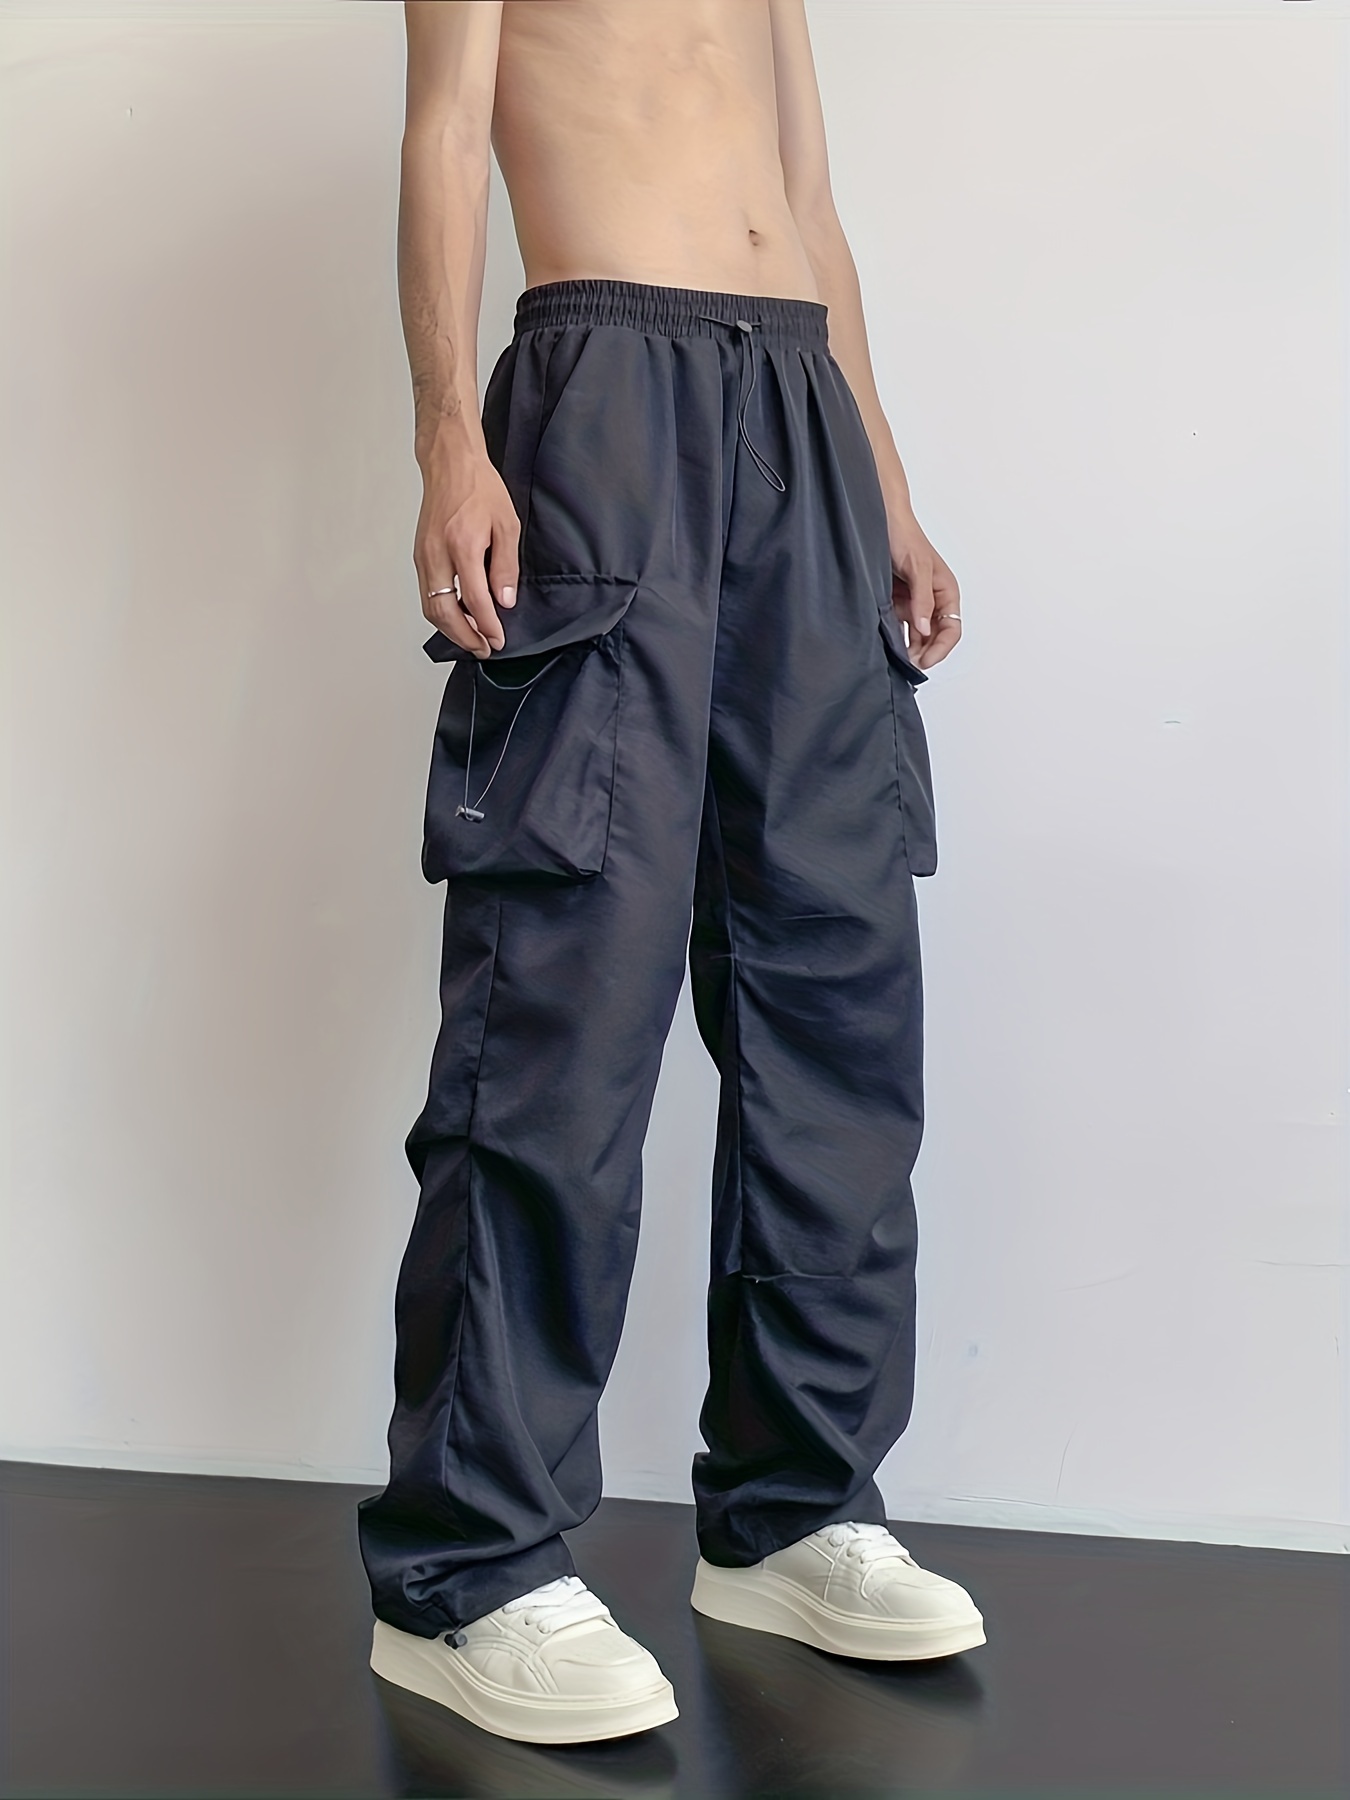 Mens Baggy Pants Loose Fit Cargo Trousers Hip Hop Pockets Casual Oversize  2022